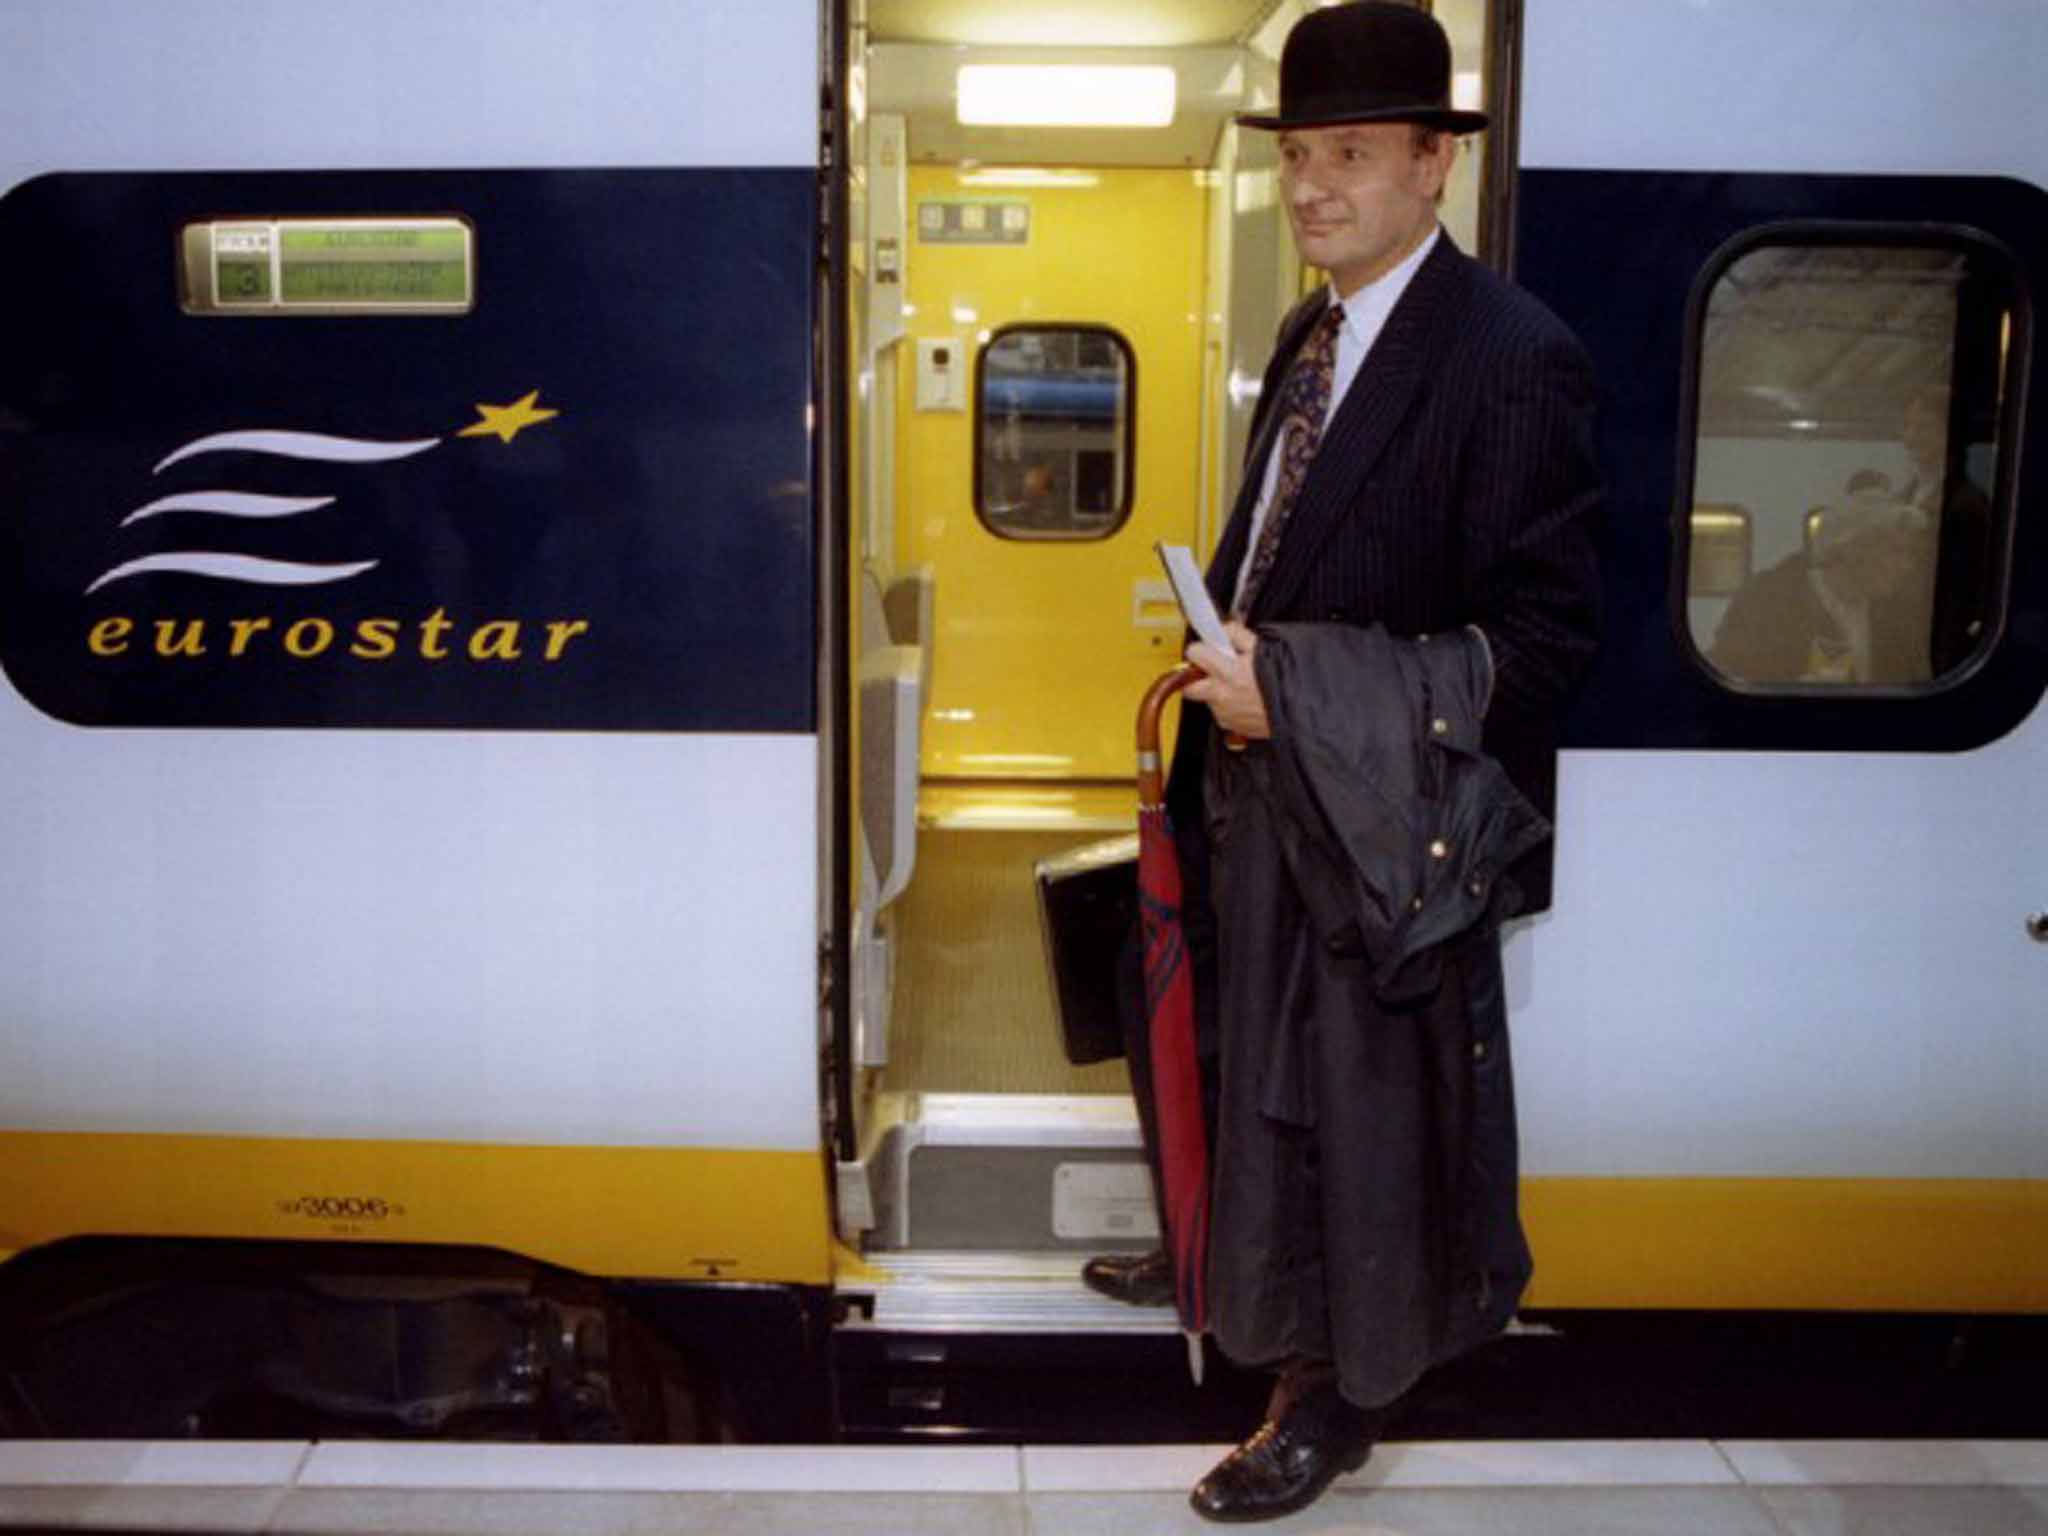 All aboard: the first Eurostar departure